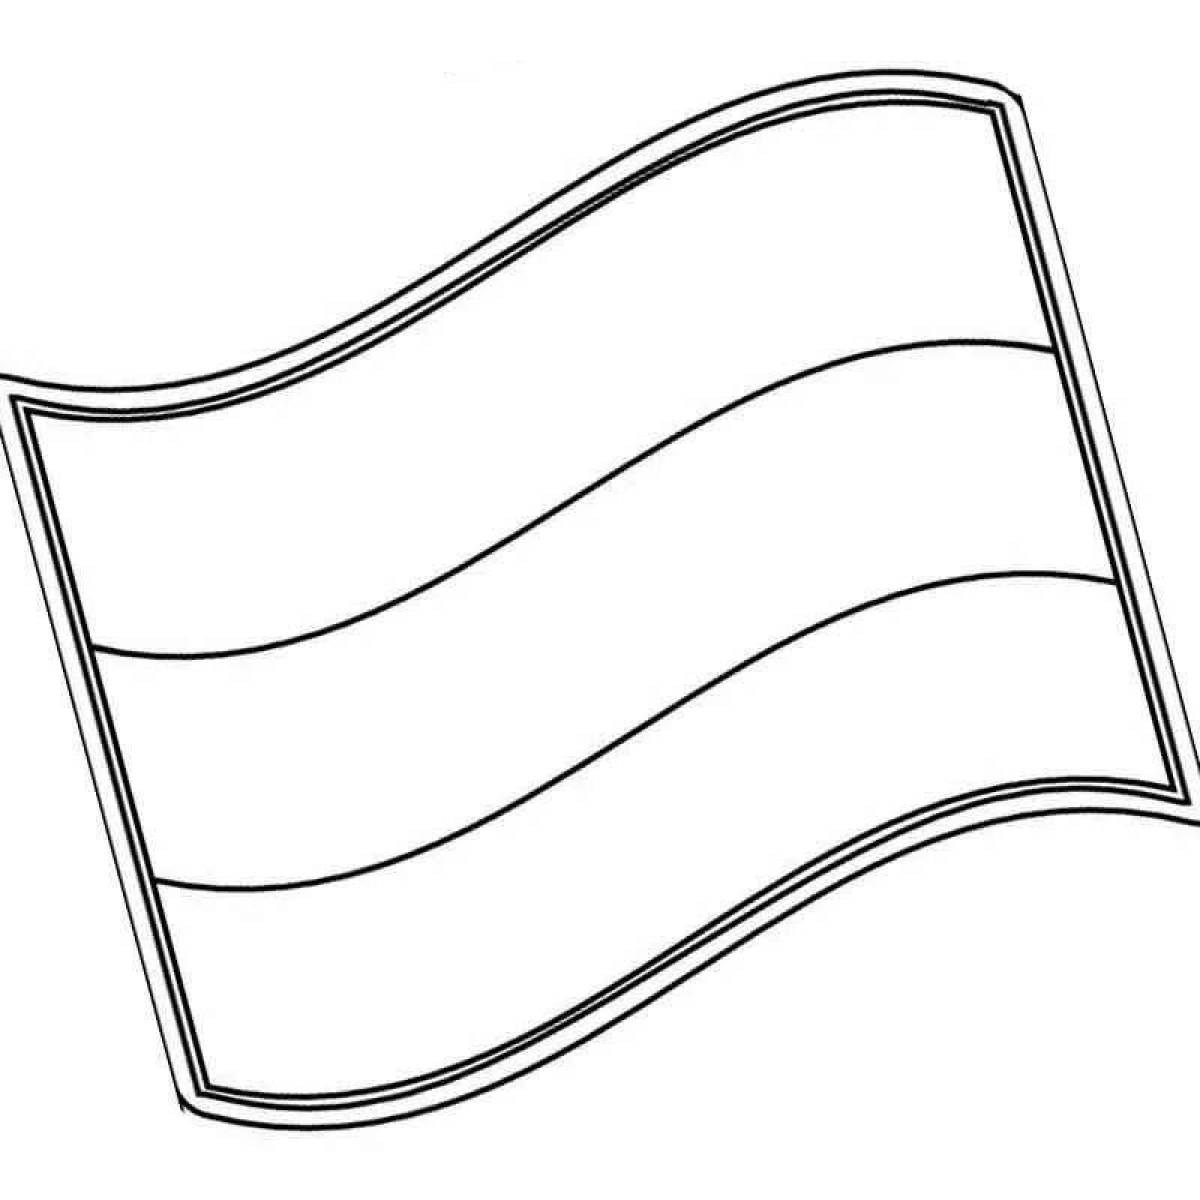 Vibrant Russian flag coloring page